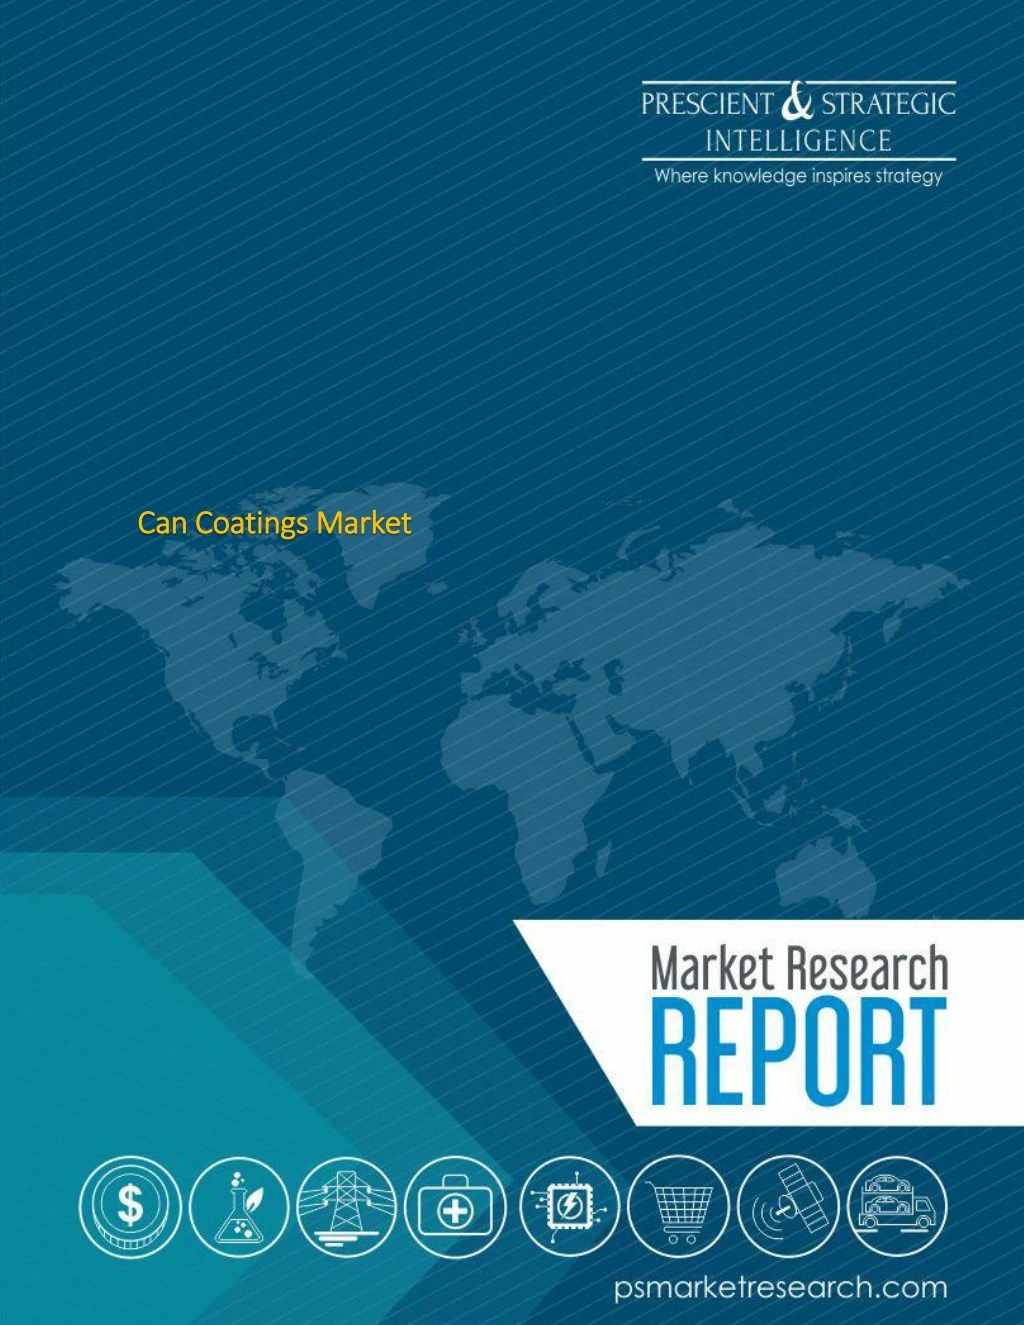 can coatings market can coatings market